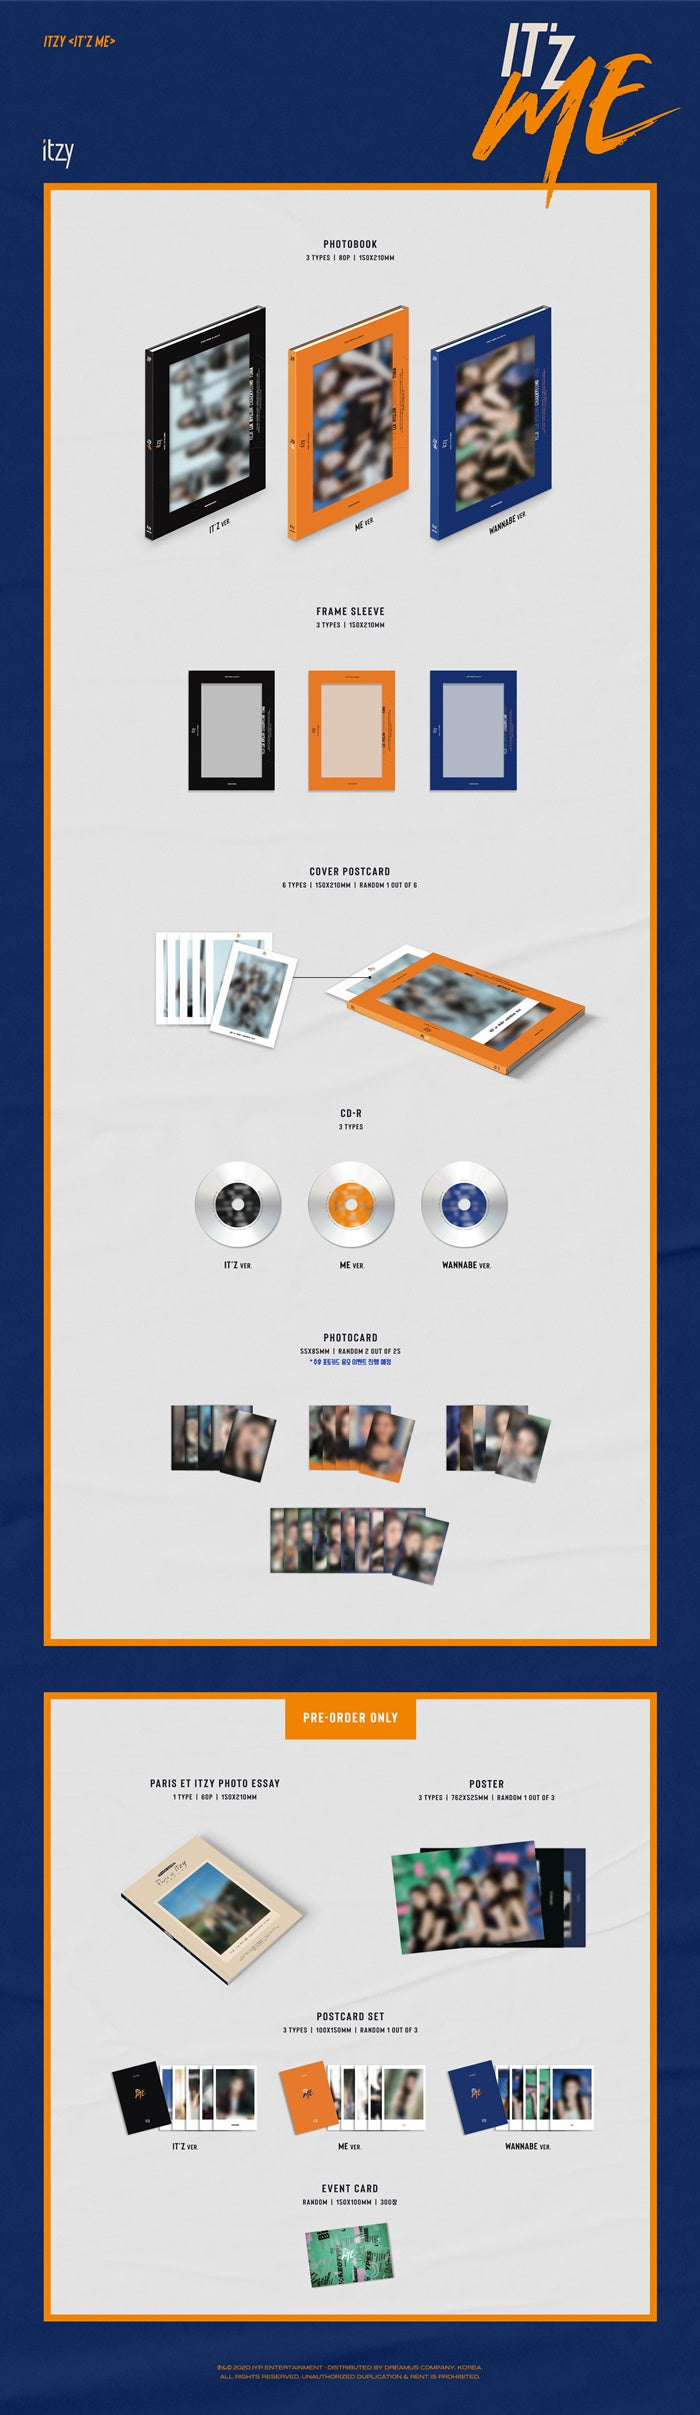 1 CD
1 Photo Book (80 pages)
1 Cover Post Card (random out of 6 types)
2 Photo Cards (random out of 25 types)